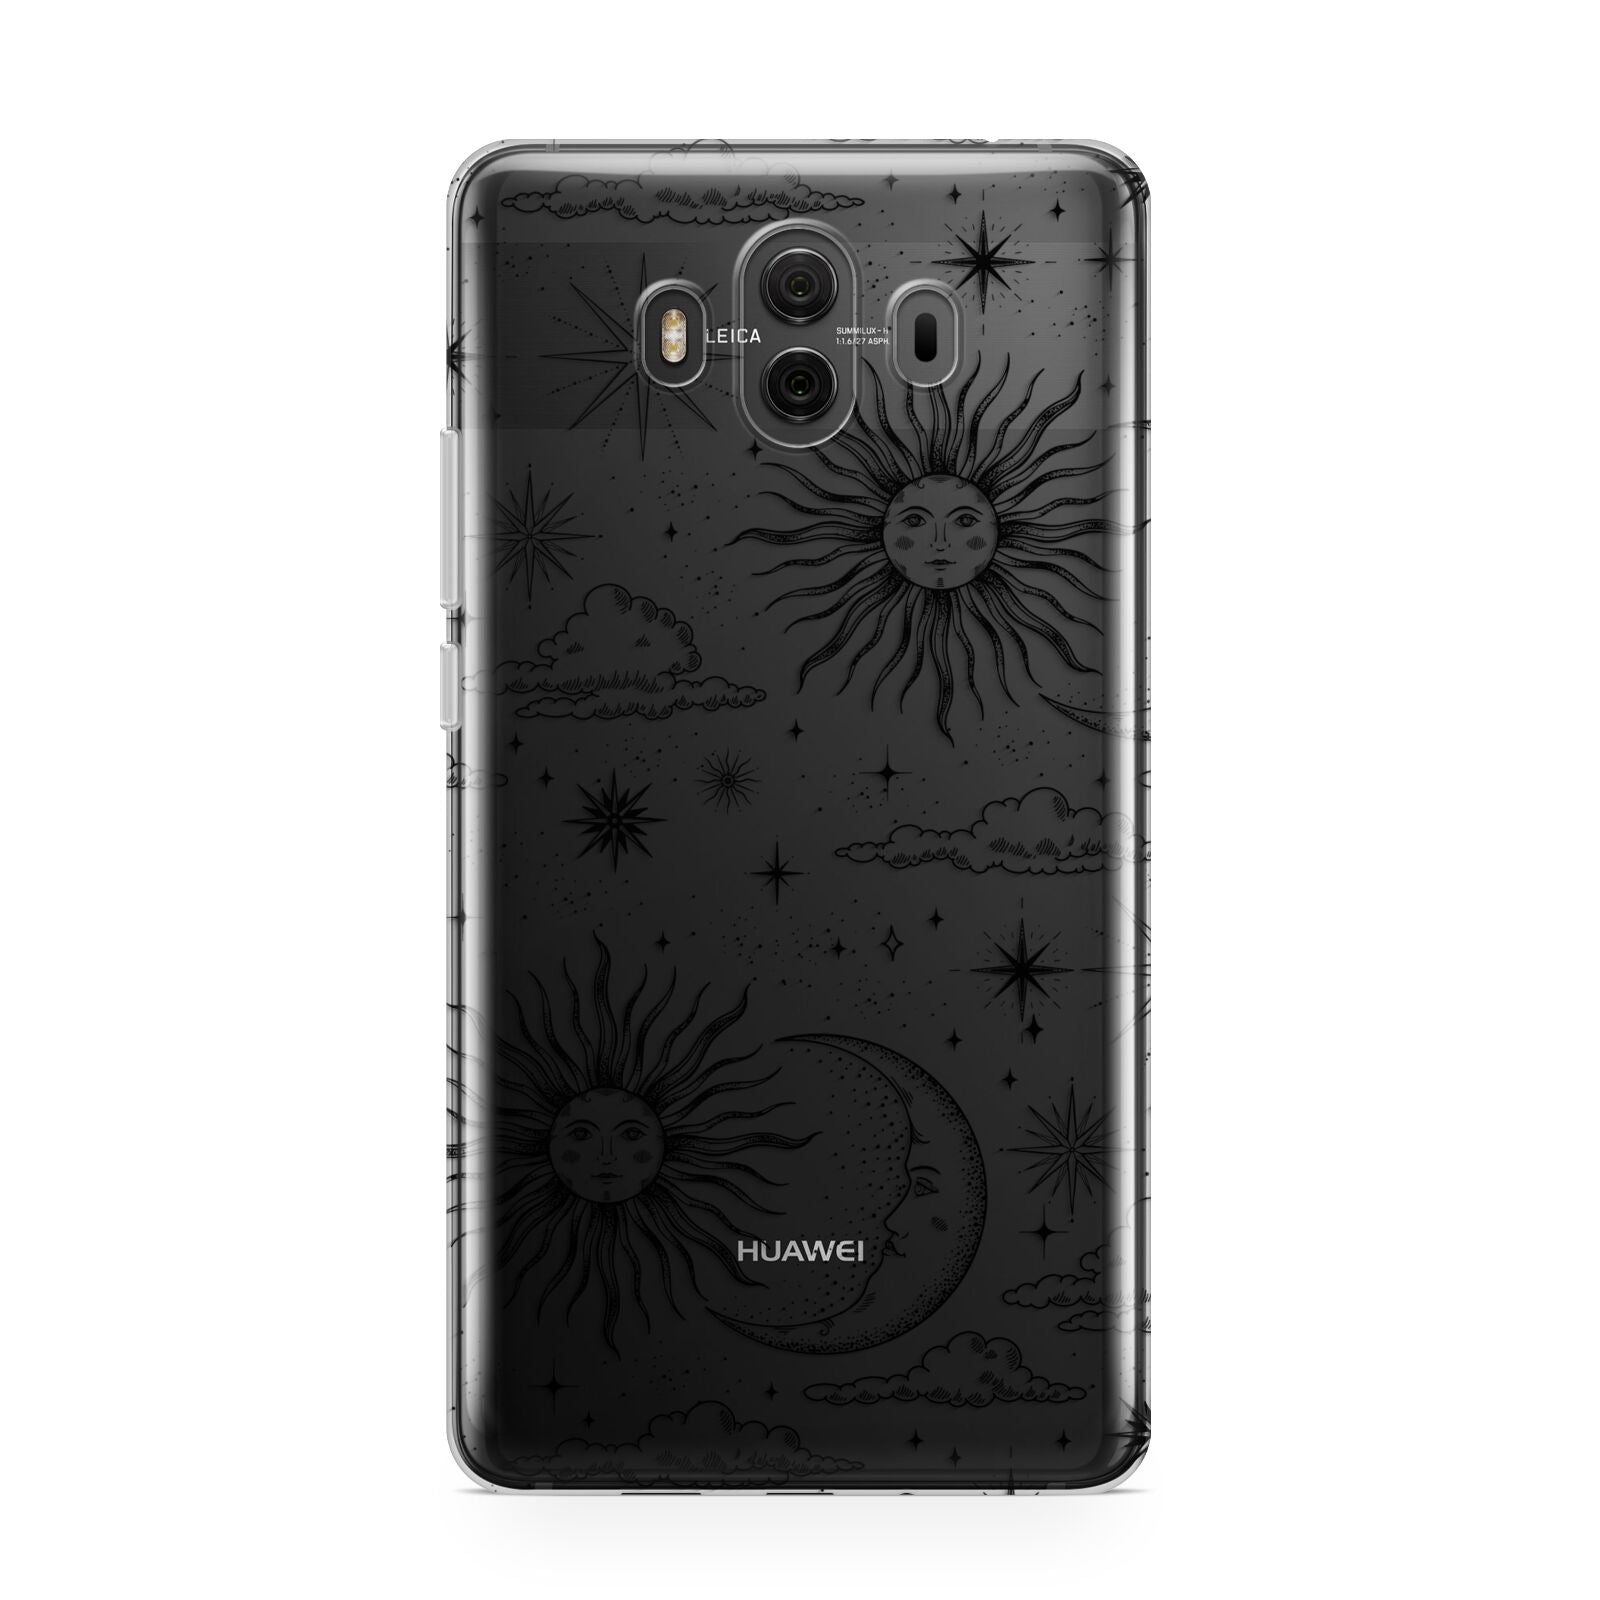 Celestial Suns Clouds Huawei Mate 10 Protective Phone Case